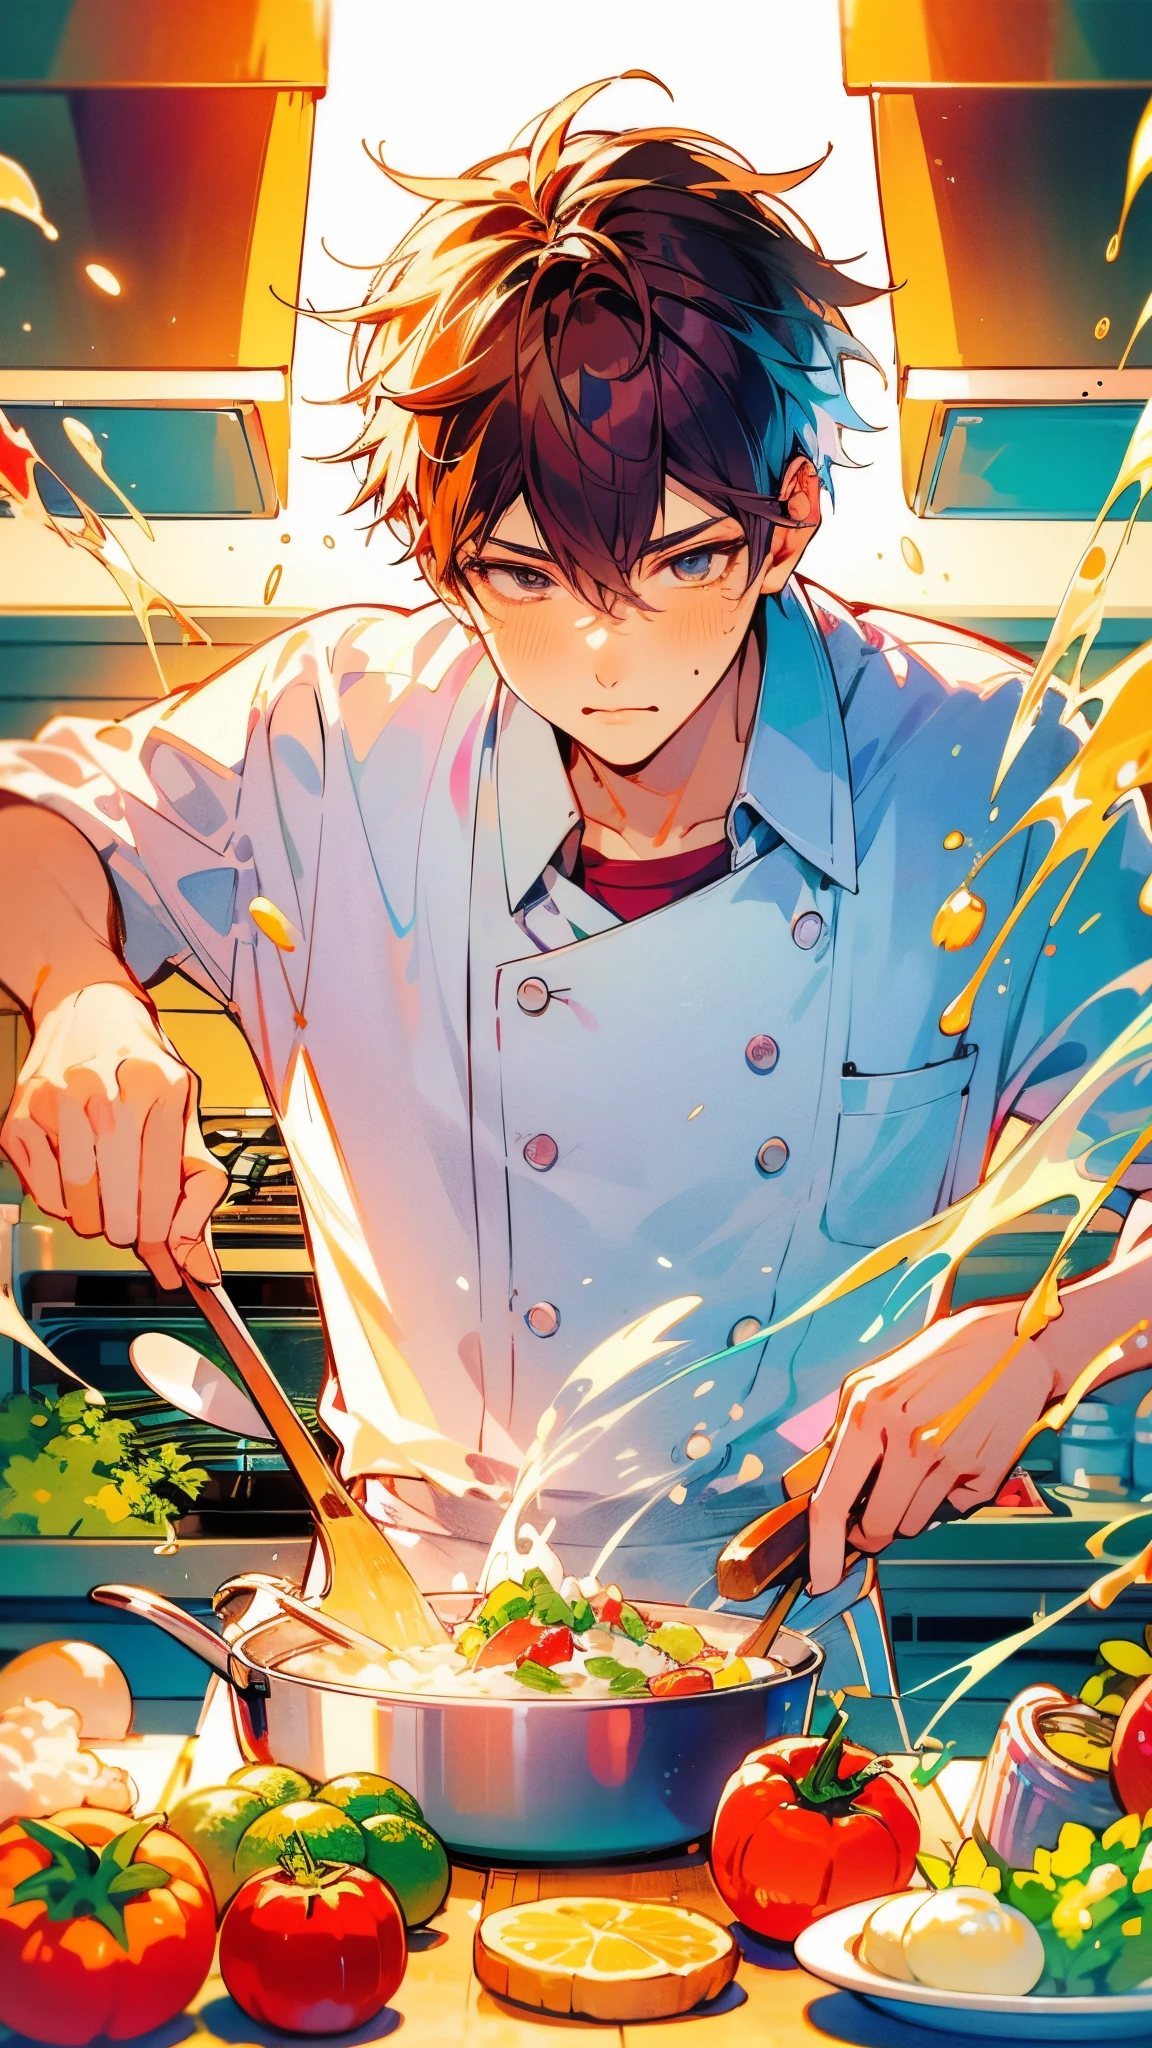 A vibrant and colorful vertical illustration in high-quality Pixiv style, featuring Ryou, an 18-year-old aspiring chef, in a cooking contest. The scene is lively and full of bright colors, showing Ryou’s intense focus as he prepares a dish in a modern kitchen. The Japanese anime style is emphasized with vivid line art, rich transparent watercolor effects, and distinct shading, highlighting Ryou’s passion and determination in his culinary journey